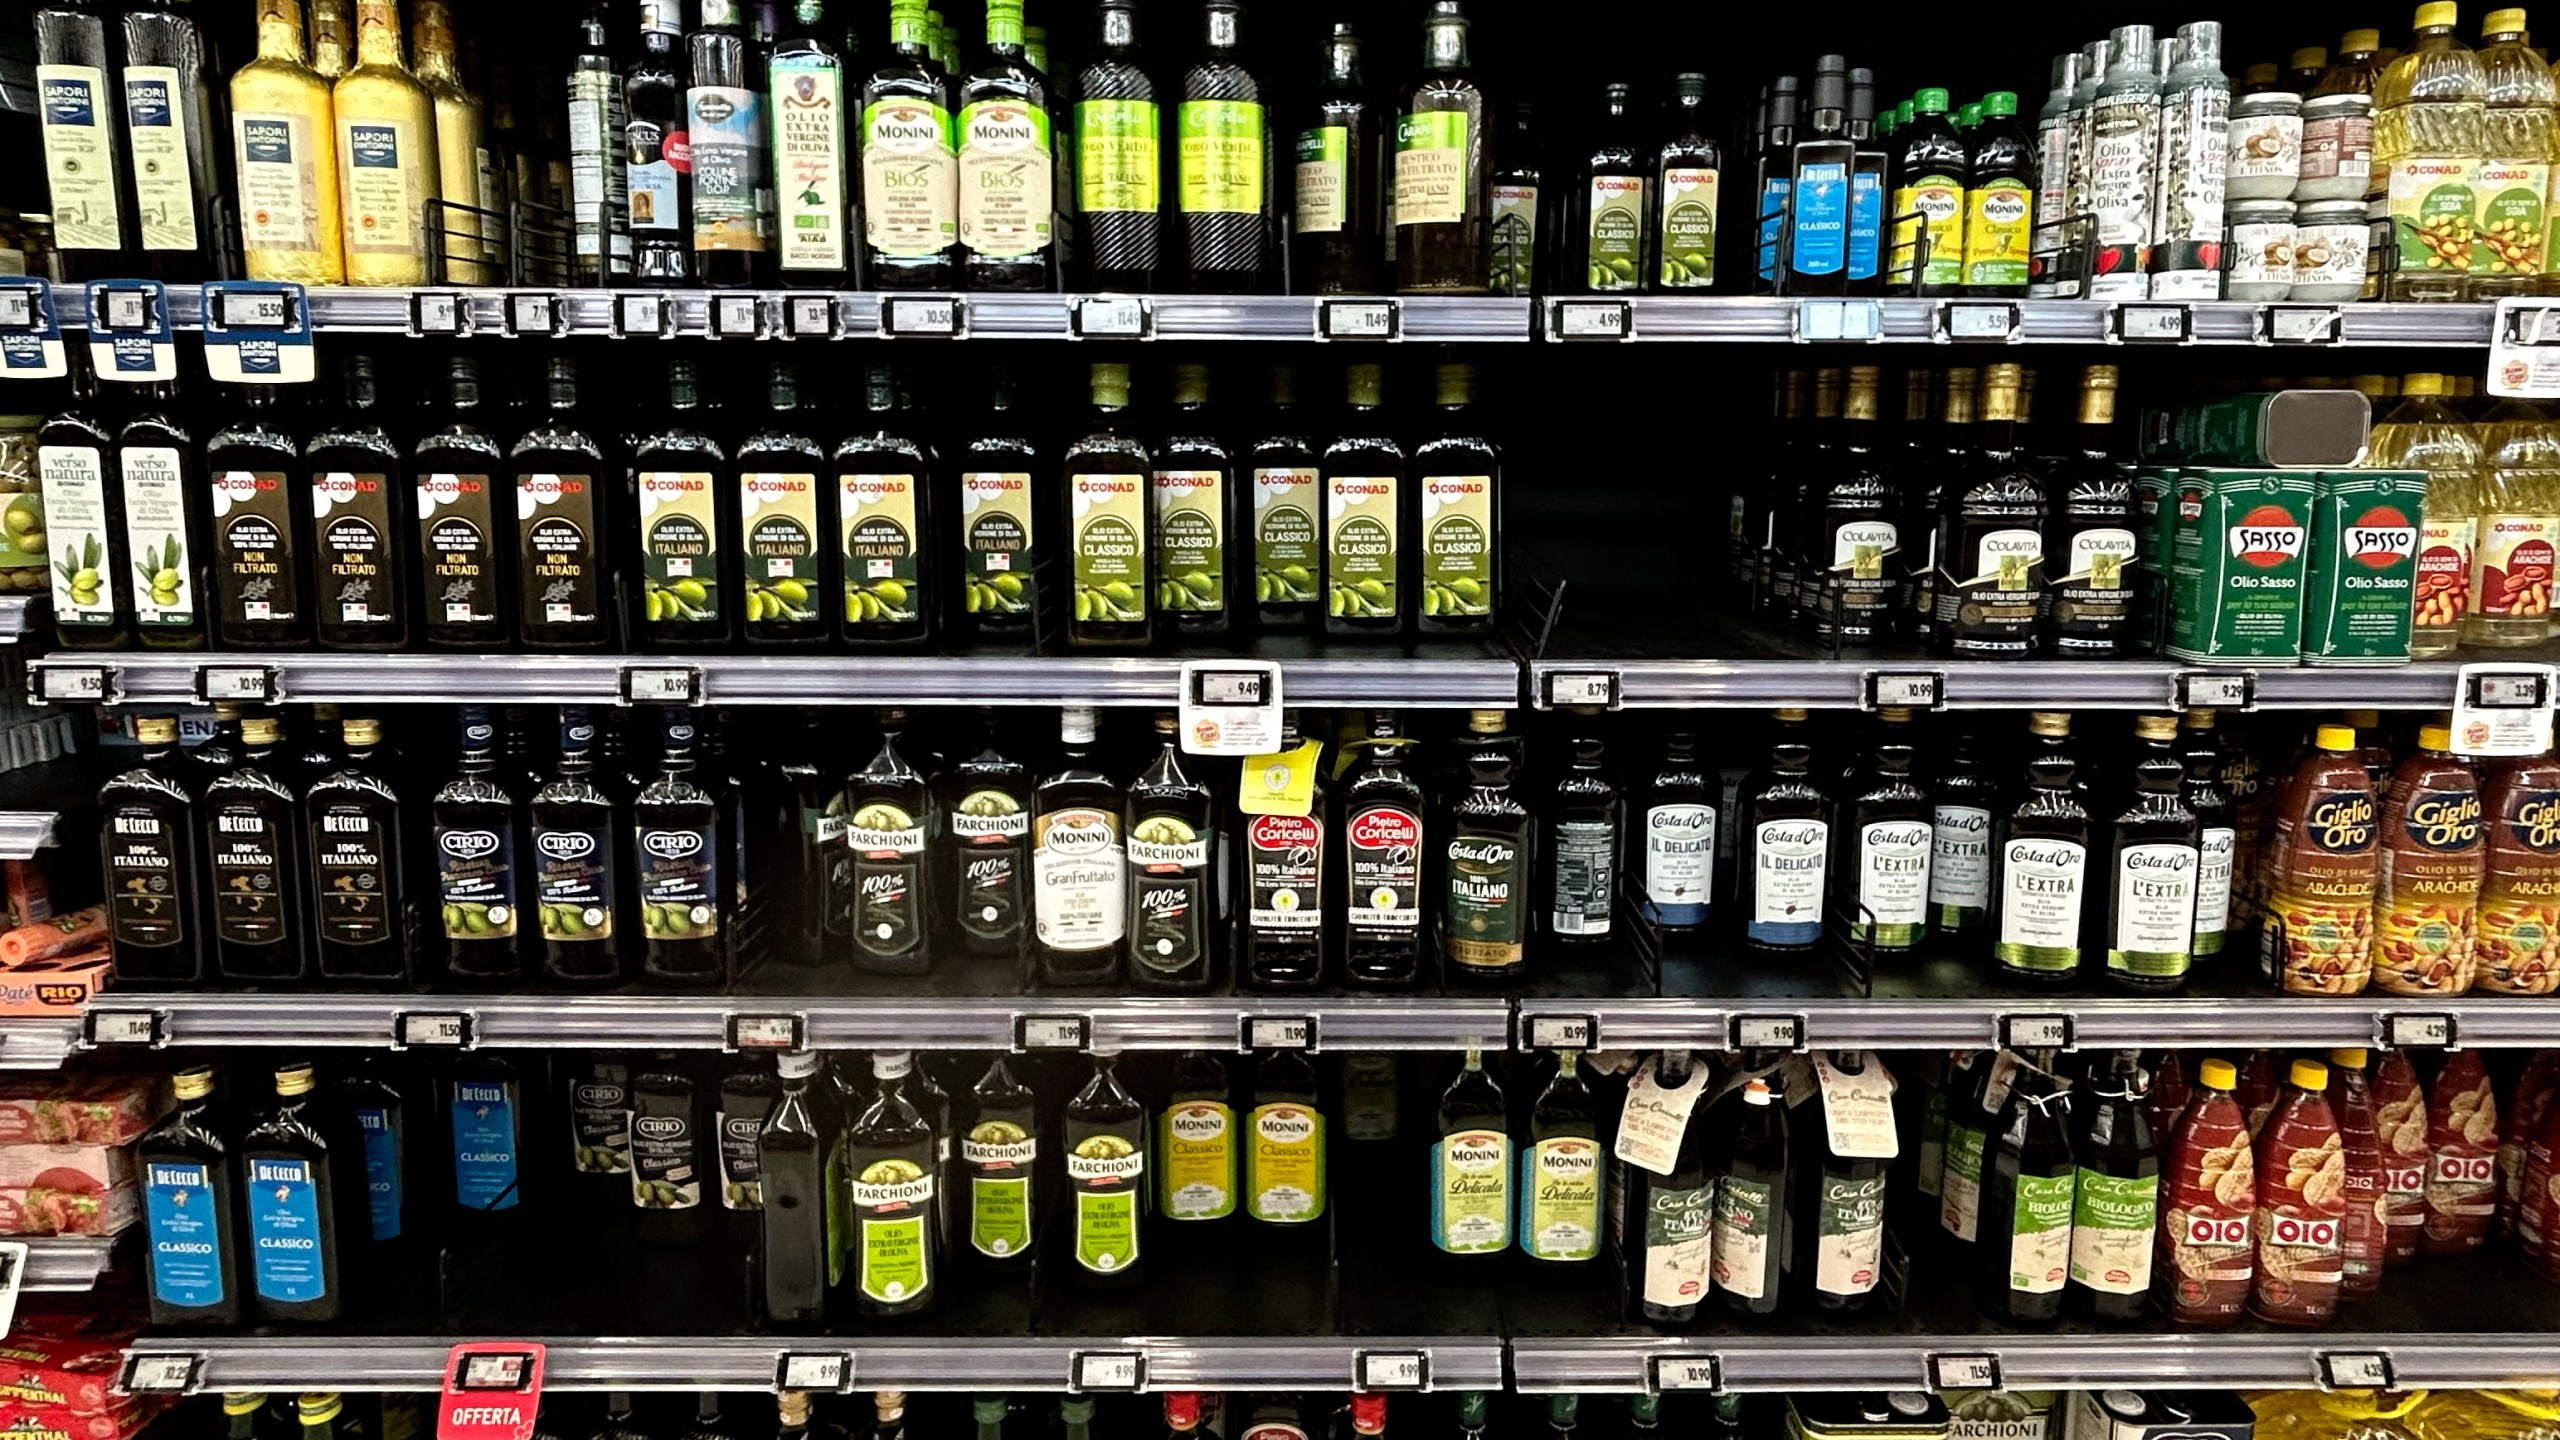 Olive oil bottles are seen in a supermarket in Rome, Friday, March 8, 2024. One-third of Italians have reduced their consumption of extra virgin olive oil due to skyrocketing prices, according to a survey released Friday. But Italian producers are pushing back against the data, saying the snapshot of consumer sentiment does not give a full picture — and that sales of higher-quality Italian extra virgin olive oil are actually up. (AP Photo/Alessandra Tarantino)